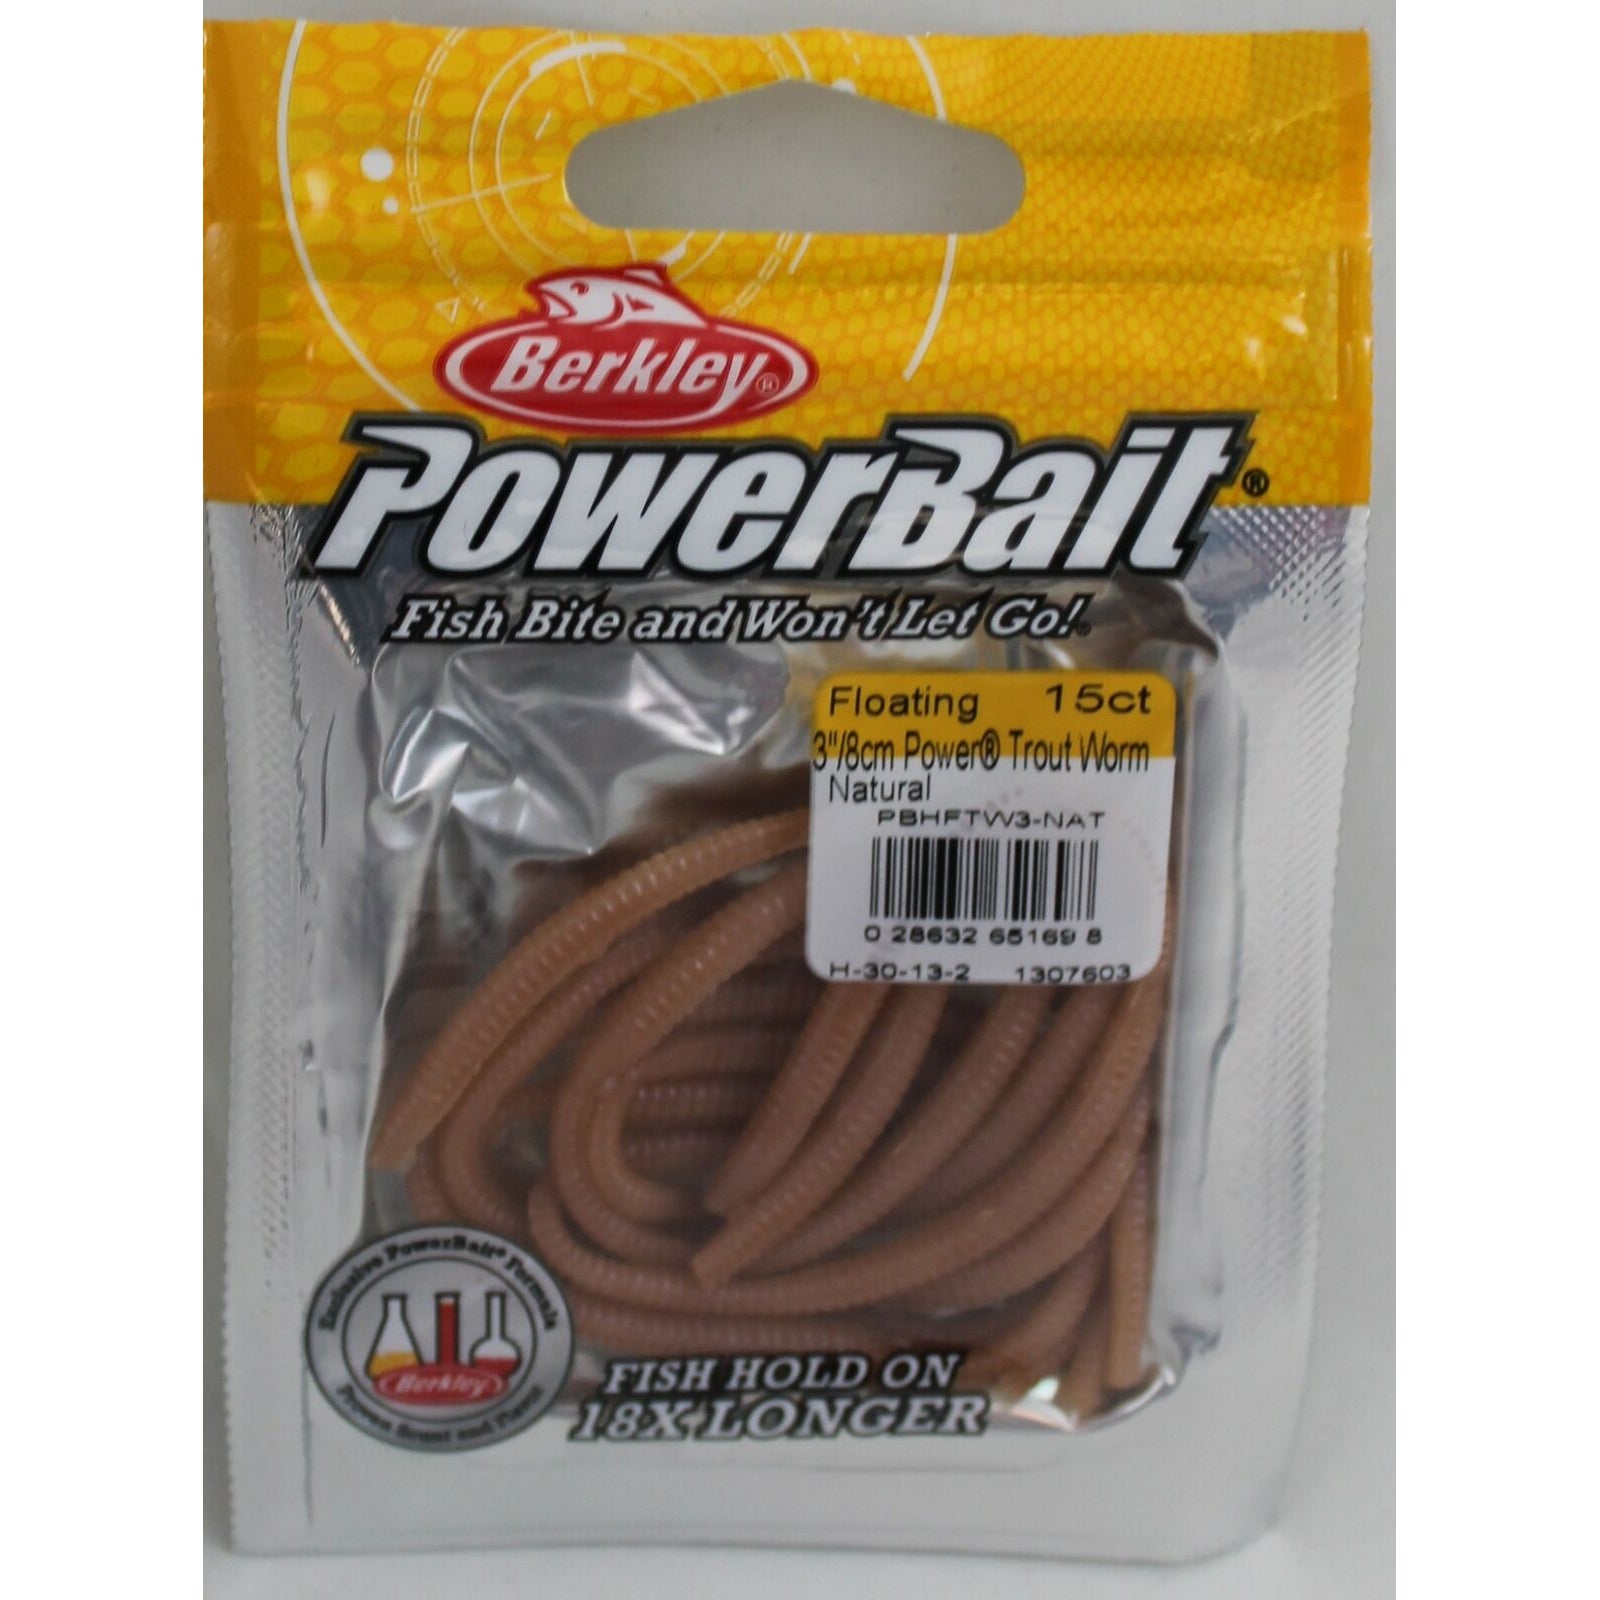 Berkley Powerbait Floating 3 Power Trout Worm White Fish Hold on